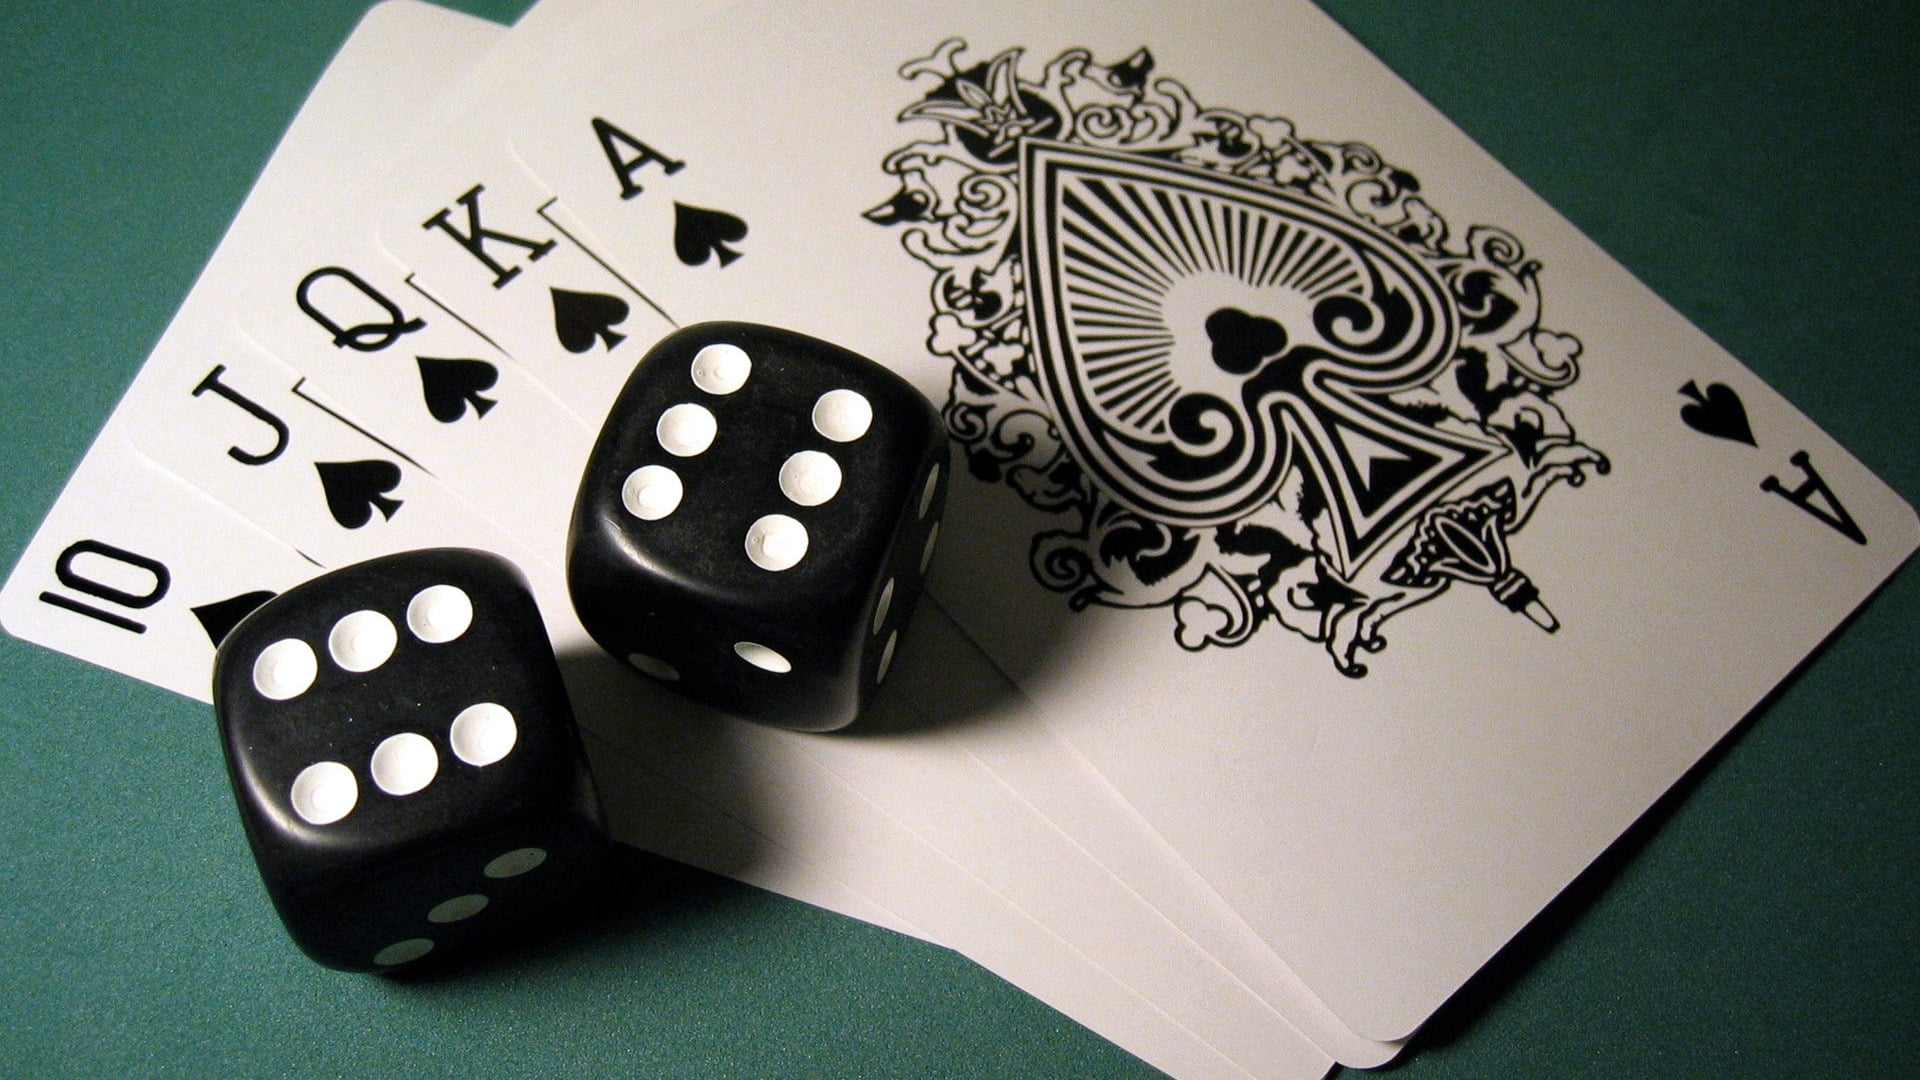 two black-and-white dice on top of spade royal straight flush cards